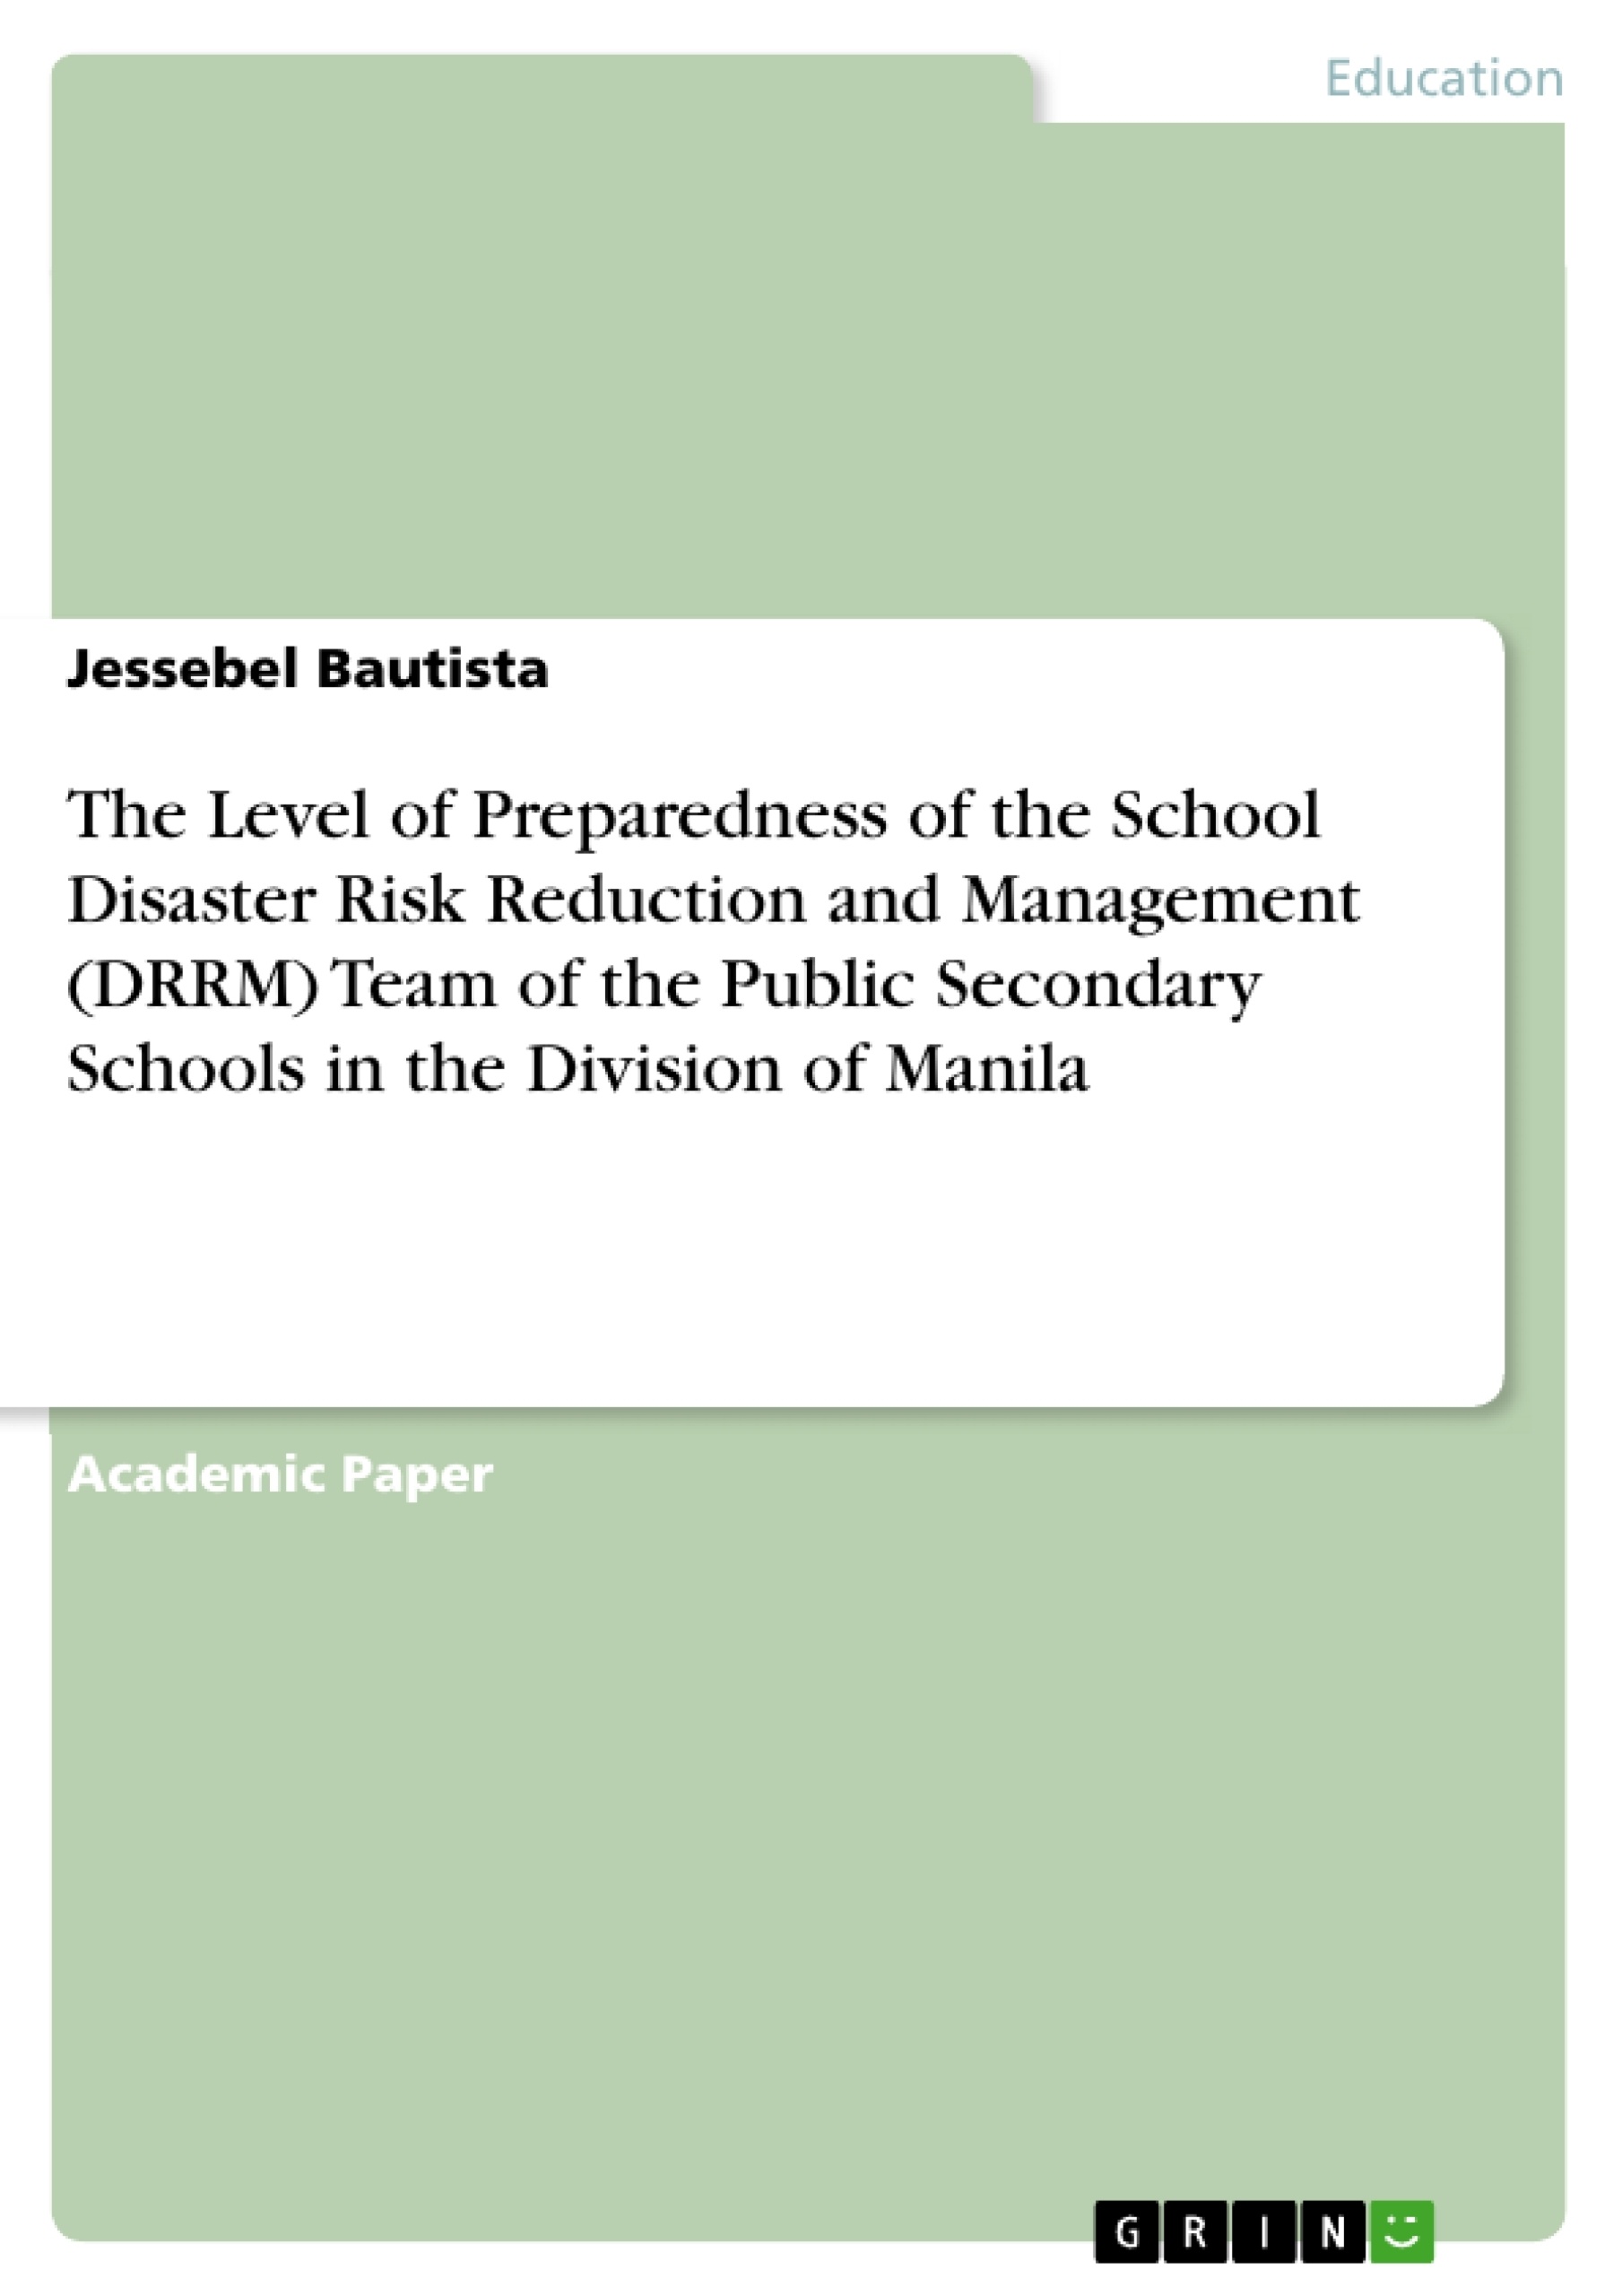 Titel: The Level of Preparedness of the School Disaster Risk Reduction and Management (DRRM) Team of the Public Secondary Schools in the Division of Manila